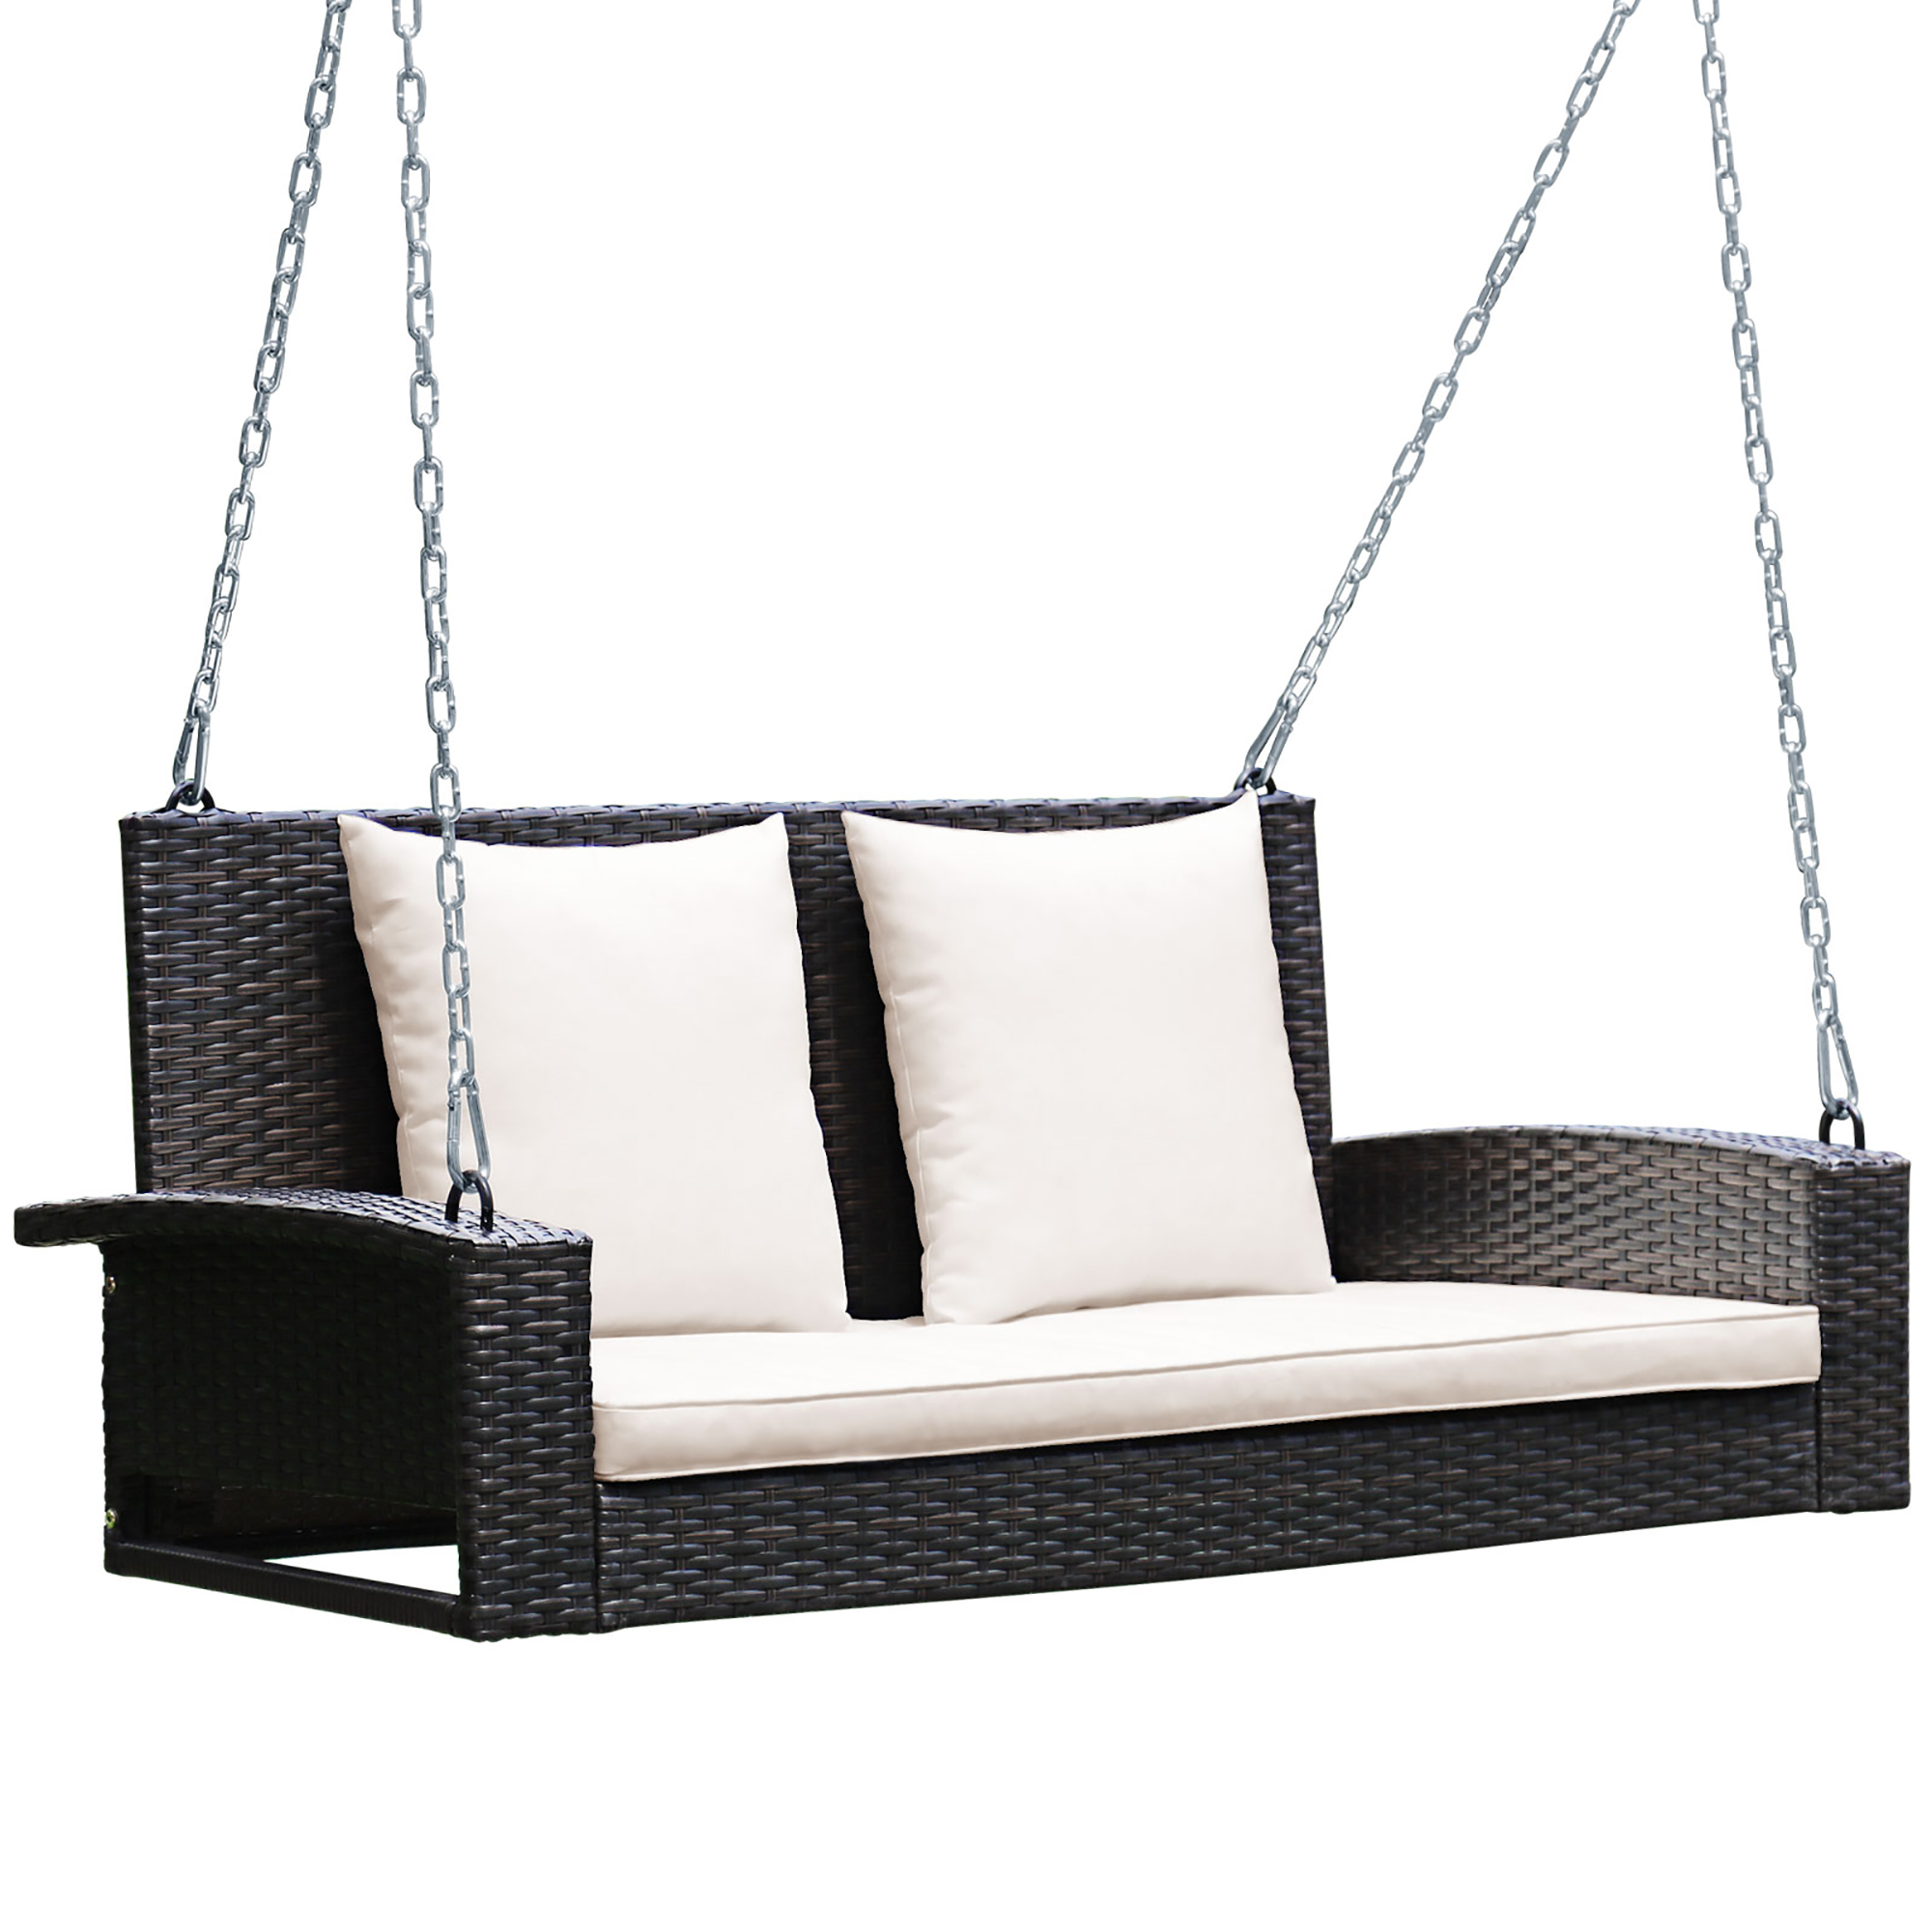 Costway 2-Person Patio Rattan Hanging Porch Swing Bench Chair Cushion Beige - image 4 of 10